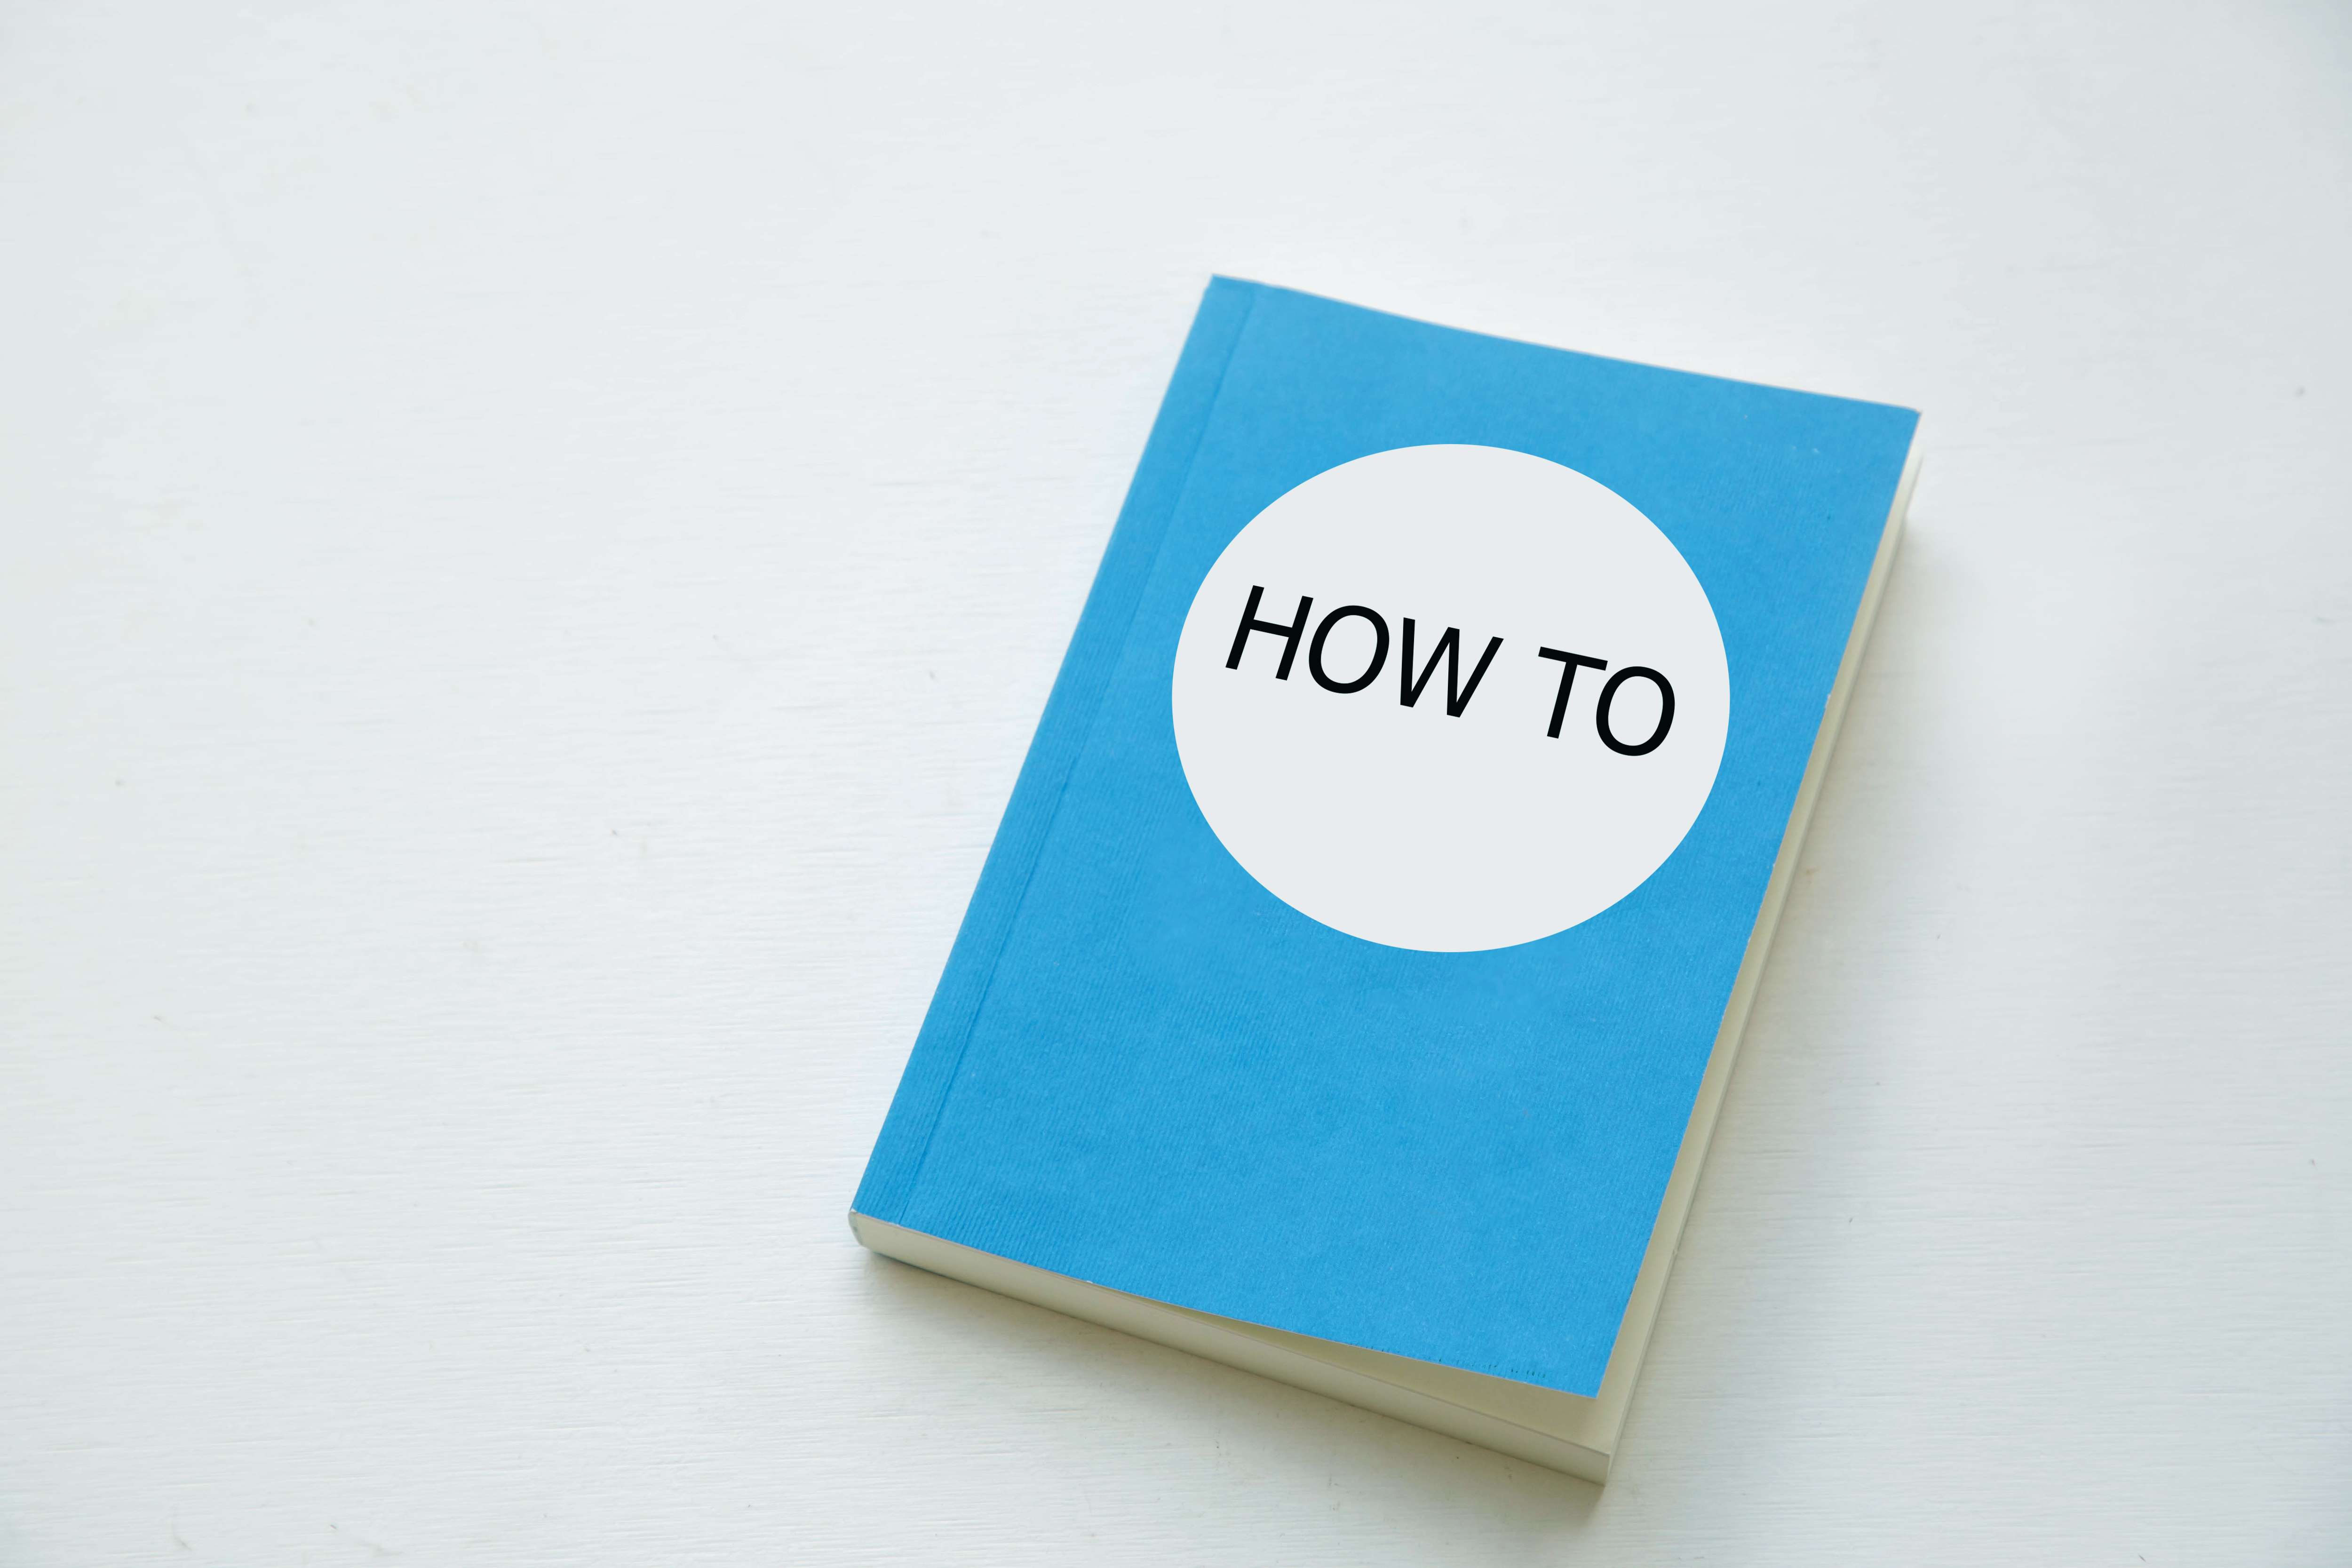 A book with the title &#039;How to&#039; lying on a table